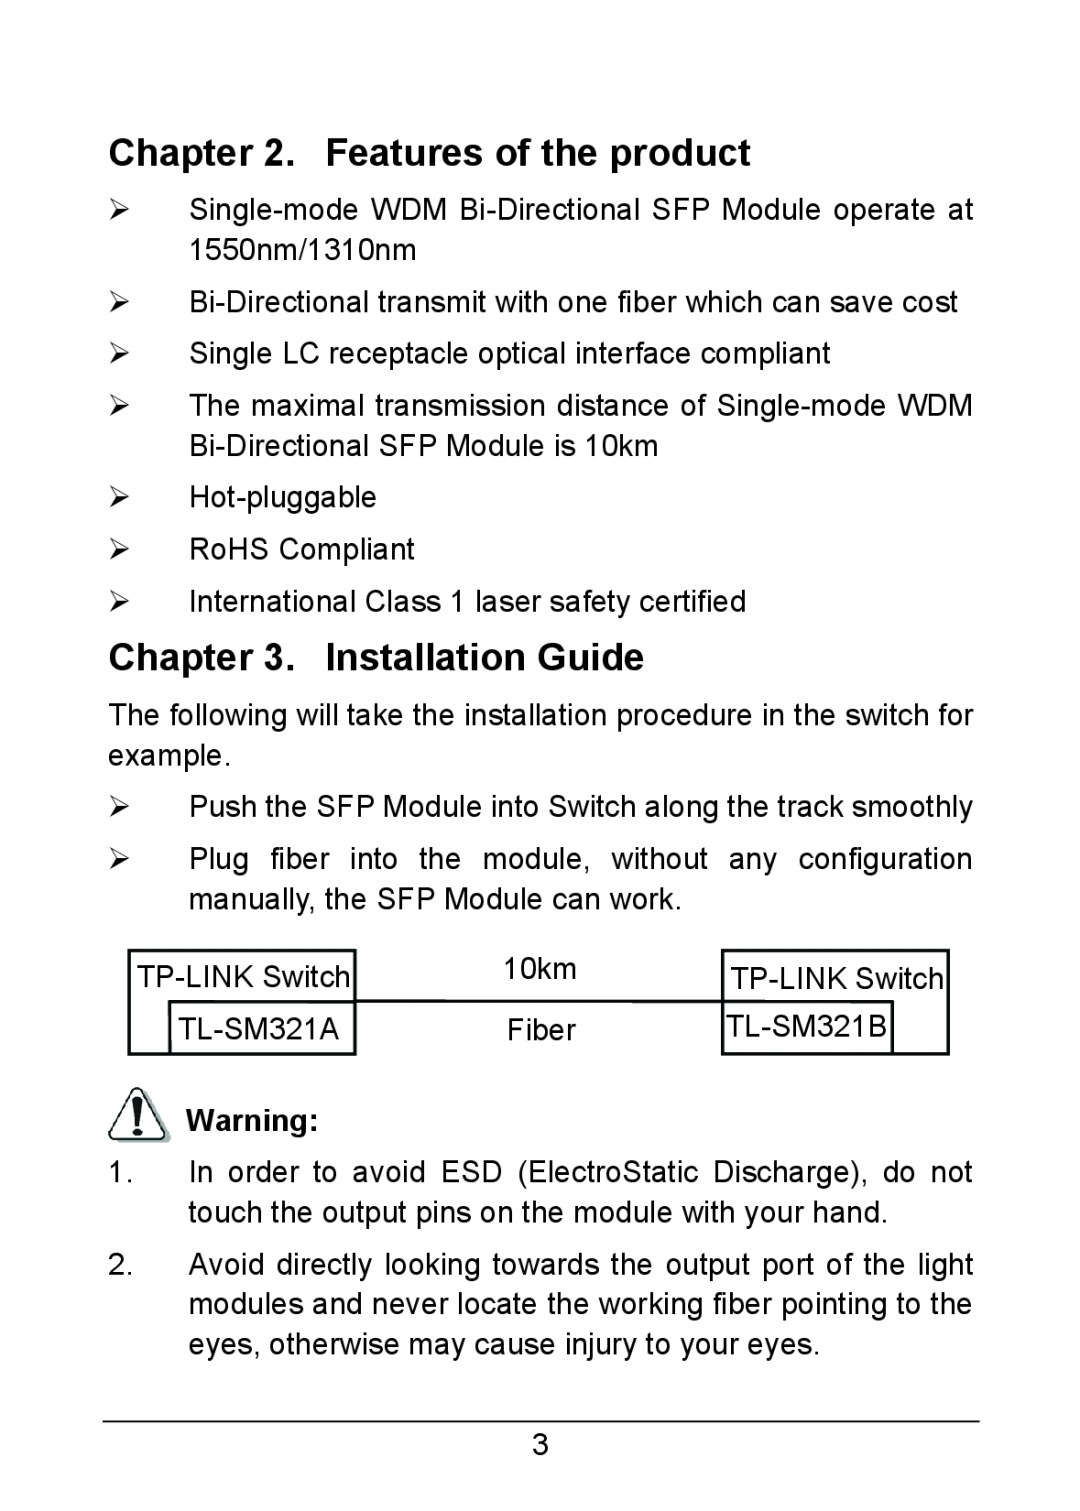 TP-Link TL-SM321A, TL-SM321B manual Features of the product, Installation Guide 